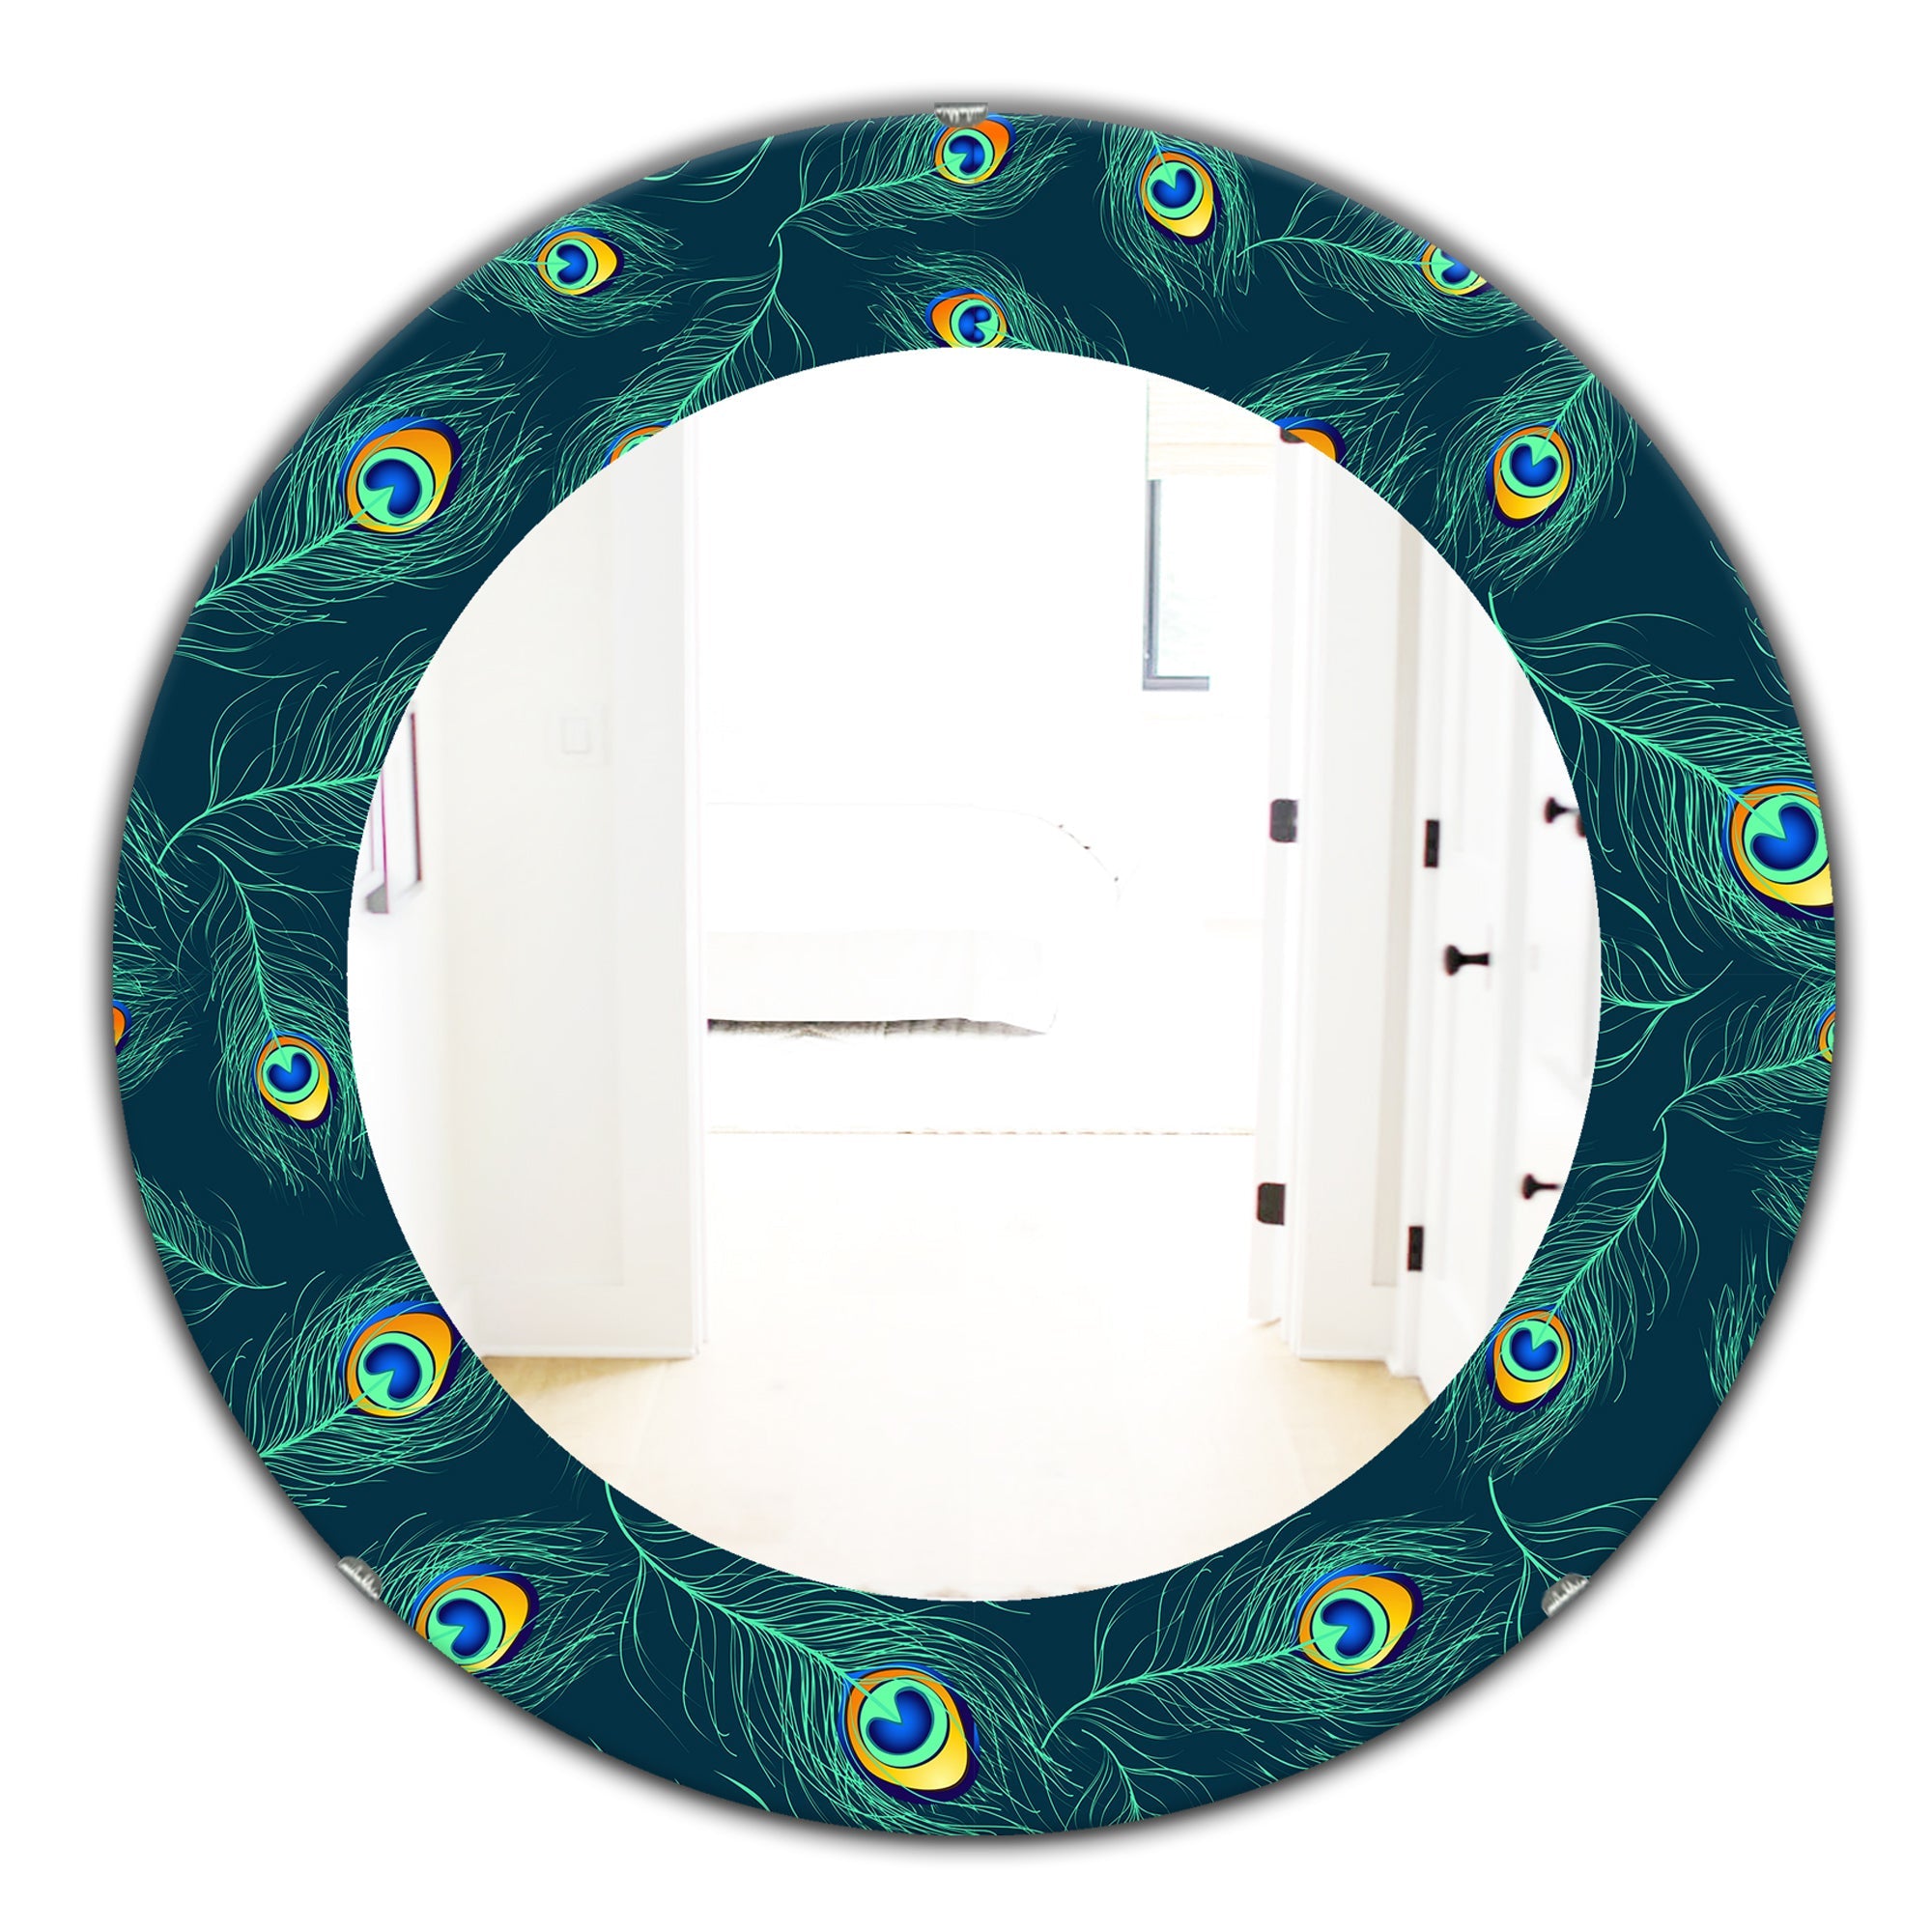 Pattern Of Peacock Feathers' Modern Mirror - Oval or Round Wall Mirror